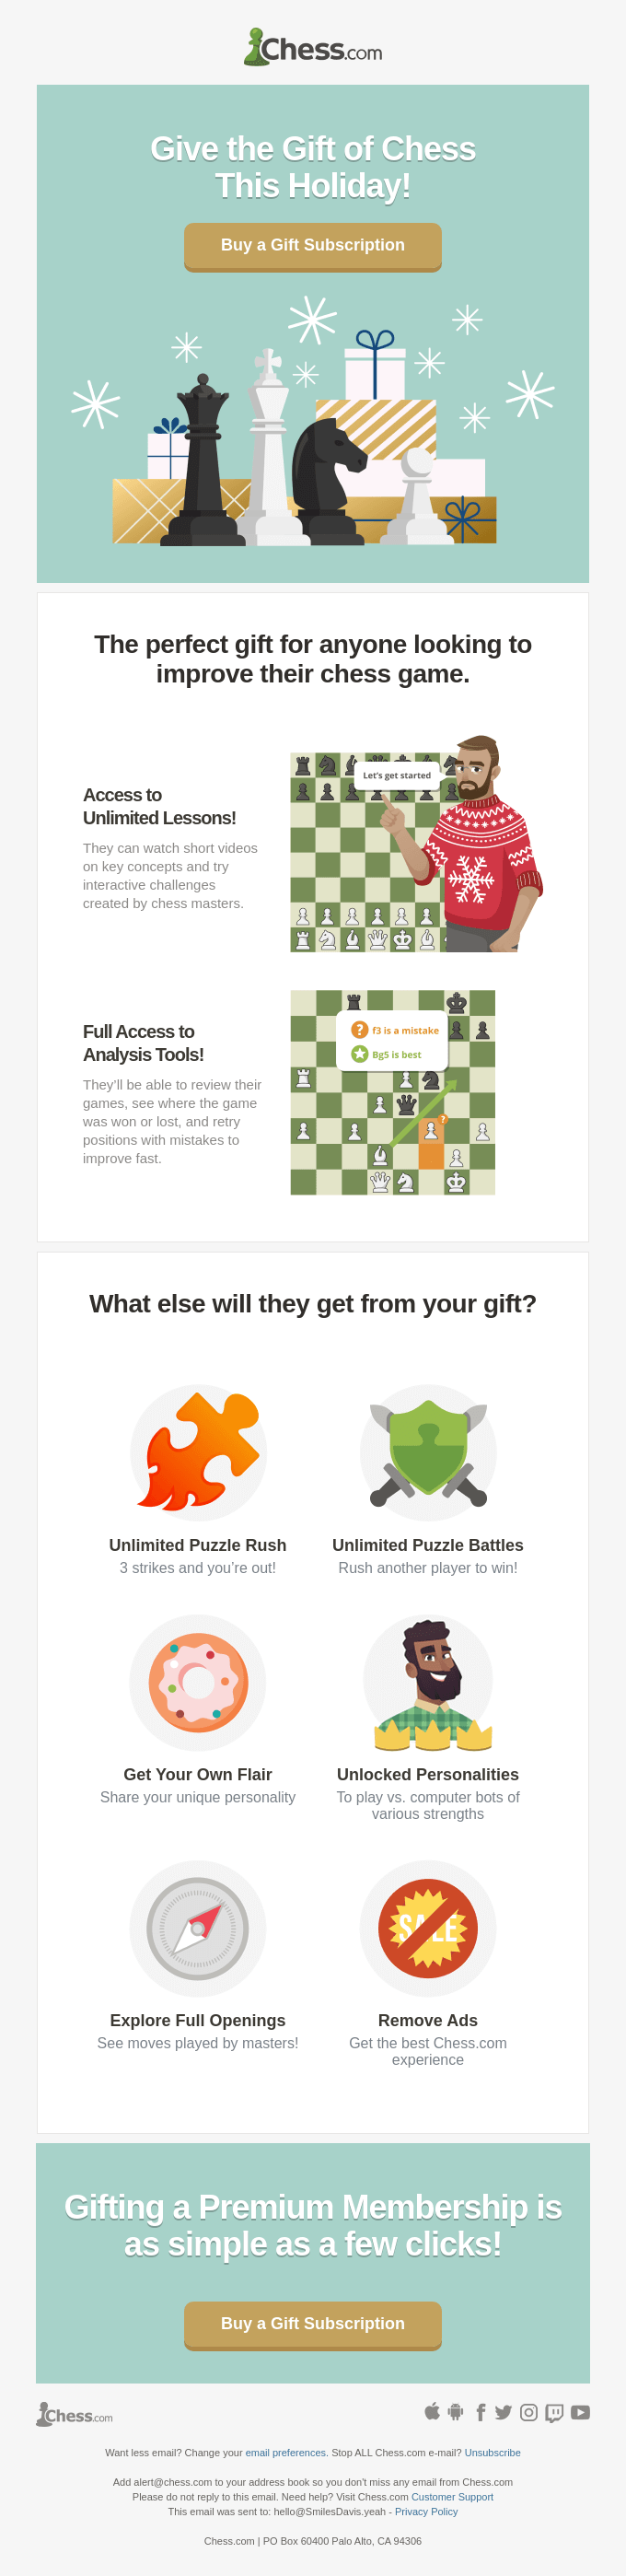 Looking for The Perfect Chess Gift This Holiday?